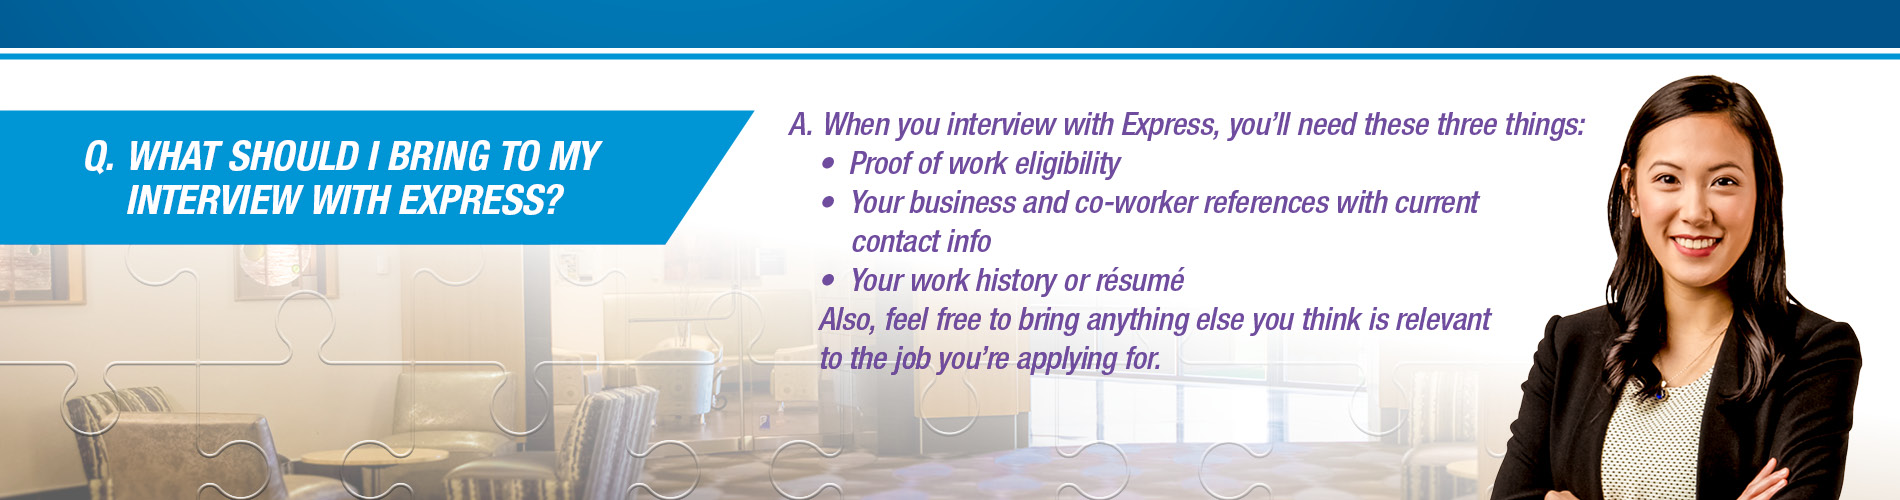 What Is Express? - What Should I Bring To My Interview With Express?